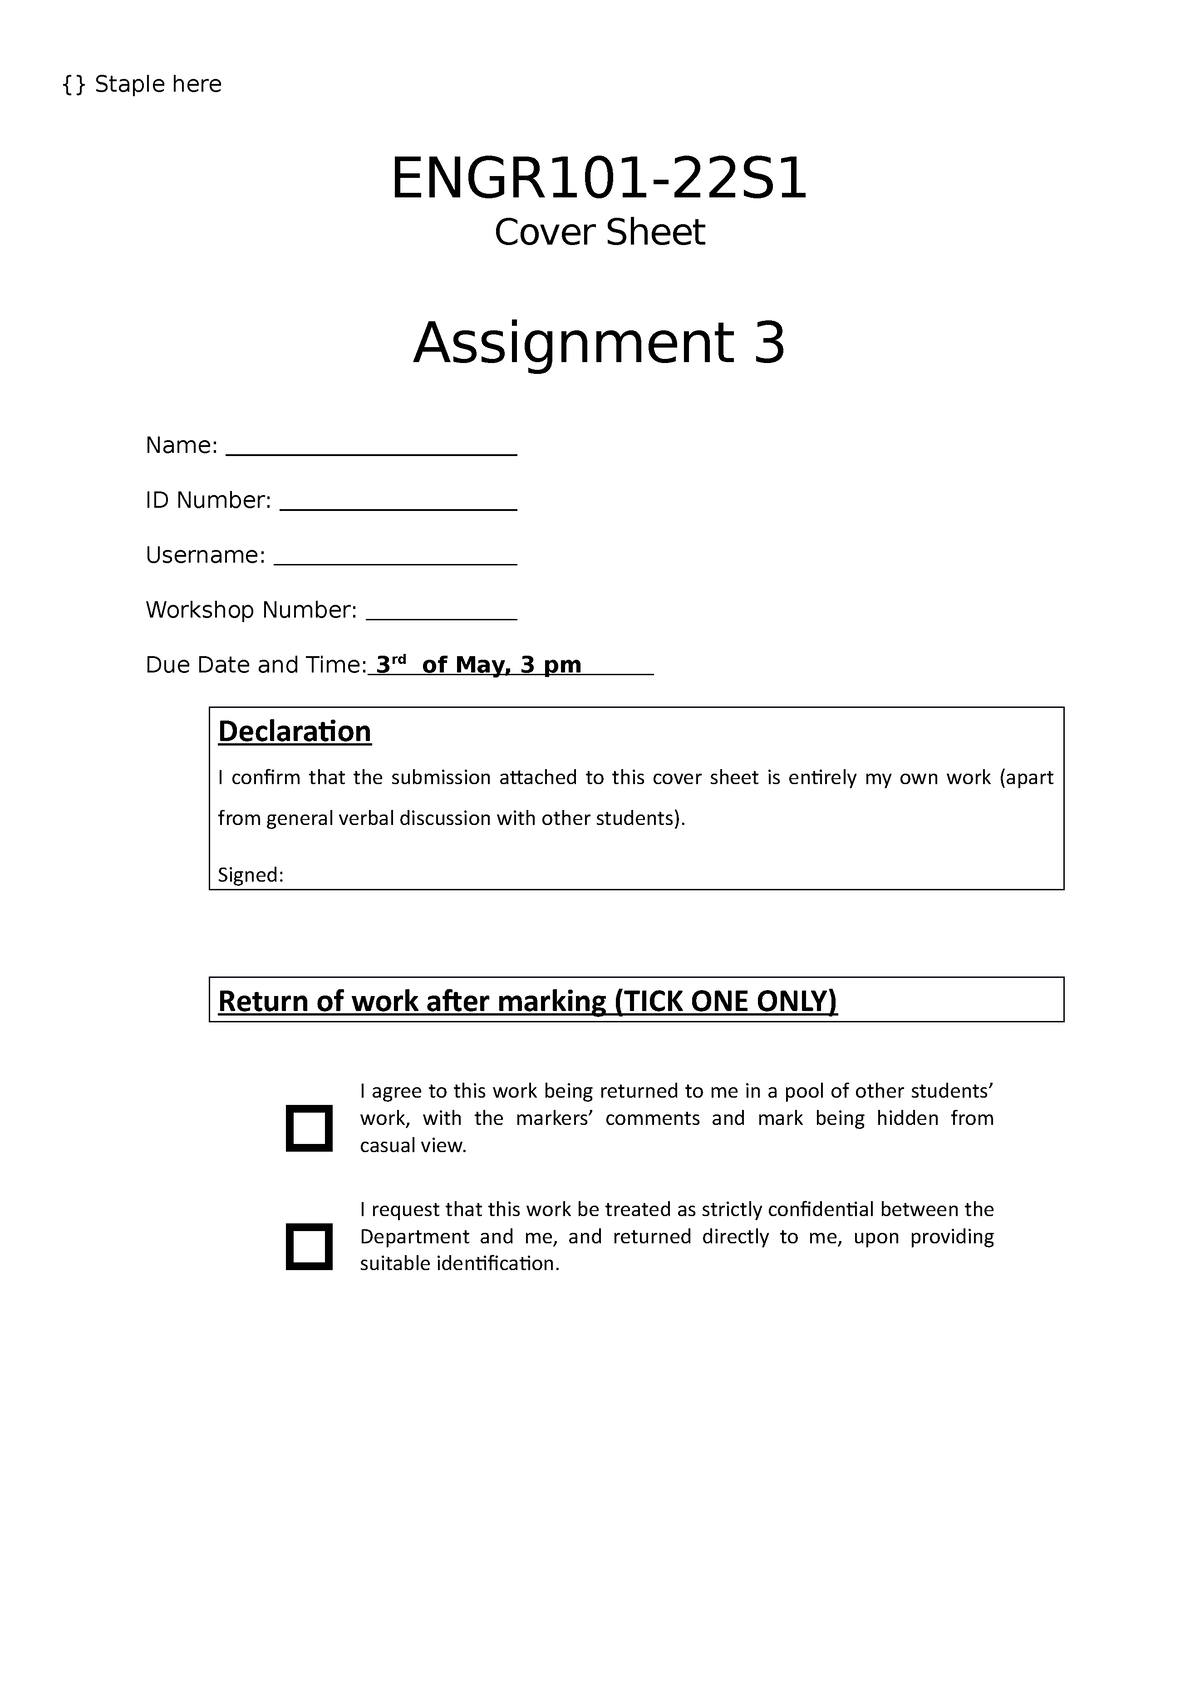 ENGR101 Assignment 3 Report Template final ver {} Staple here ENGR101